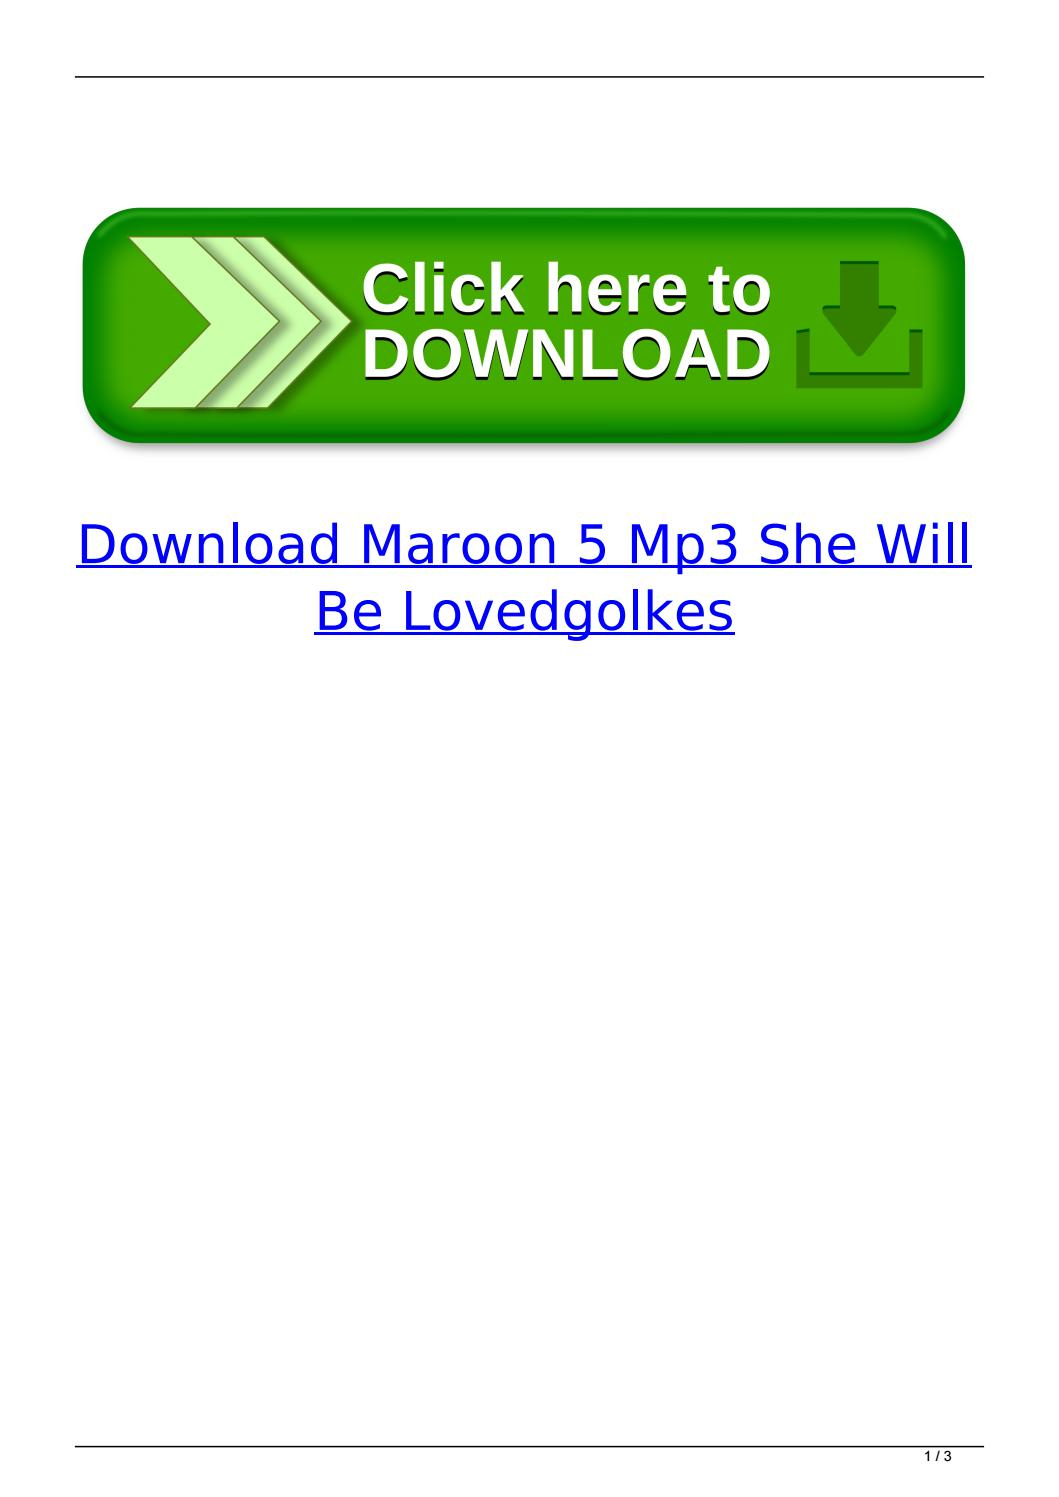 She Will Be Loved Chords Download Maroon 5 Mp3 She Will Be Lovedgolkes Sioseconre Issuu